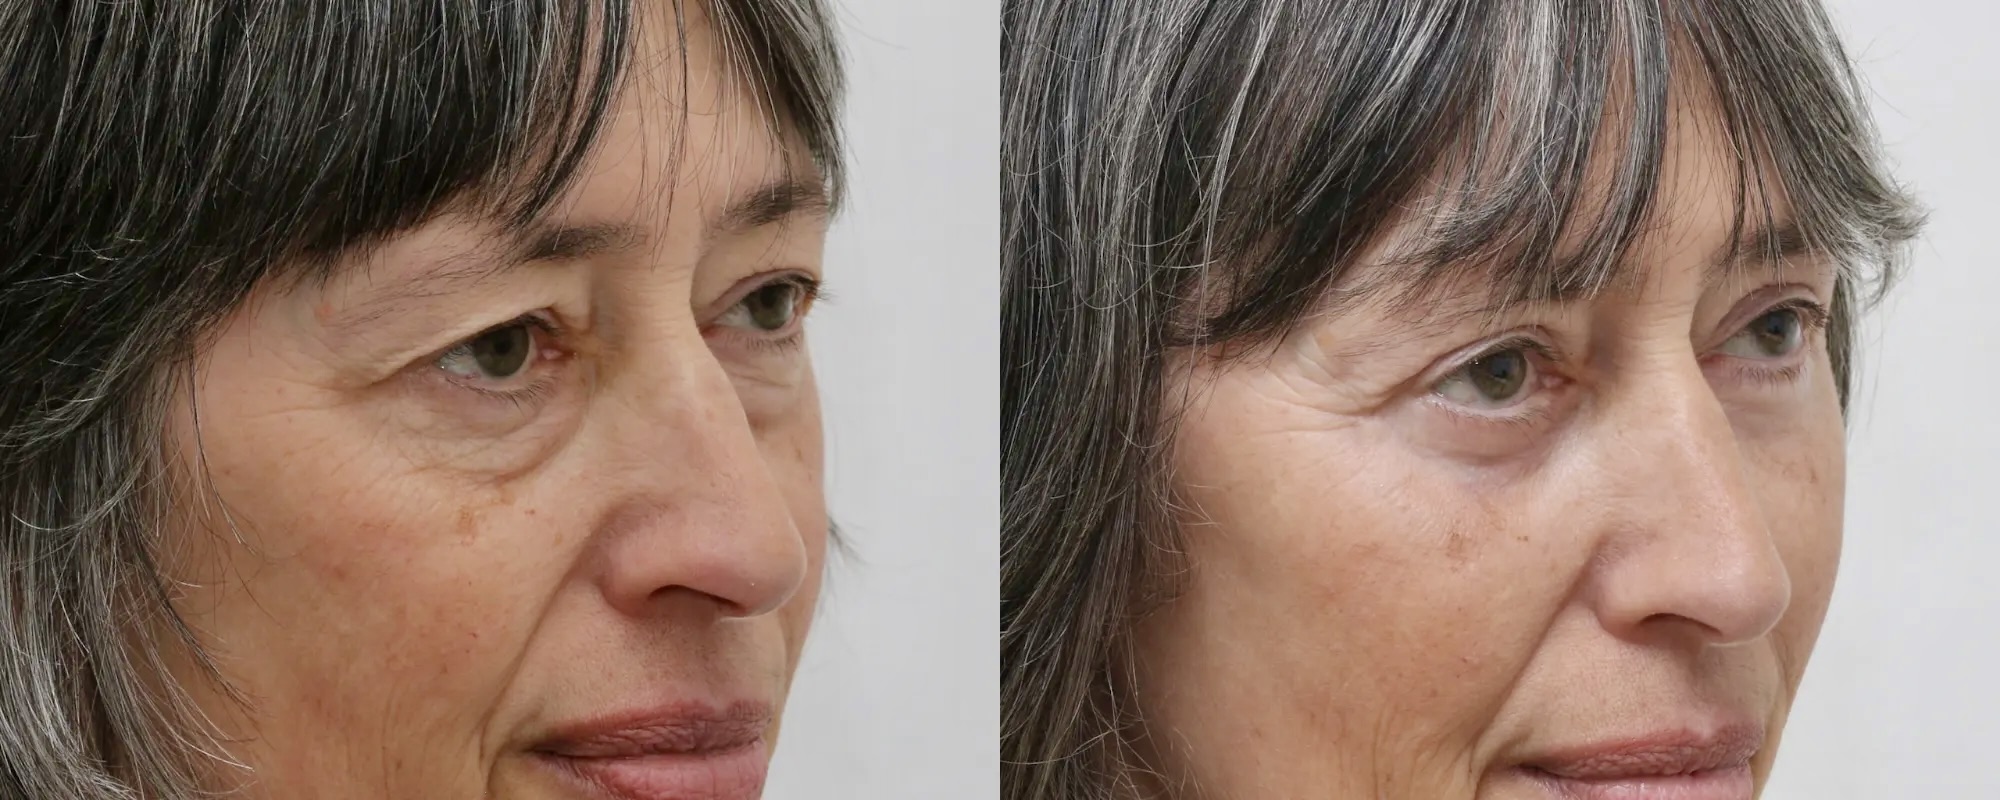 Upper and lower eyelid surgery